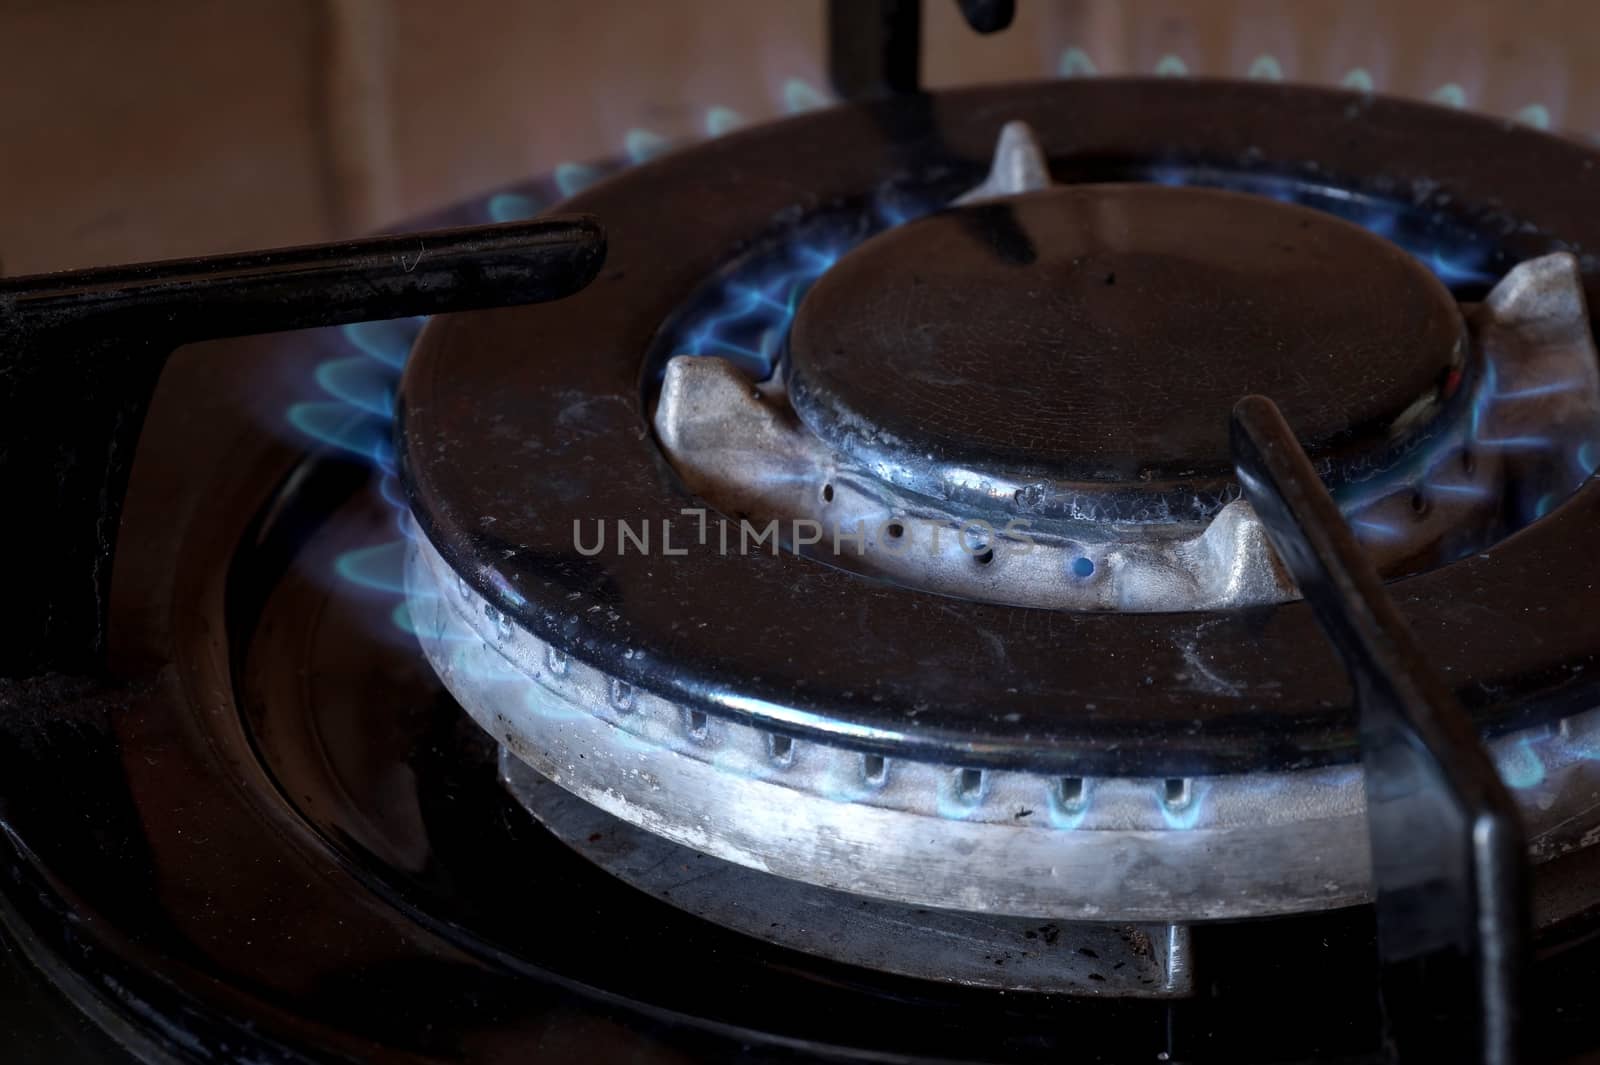 Big gas ring on the stove by Vadimdem